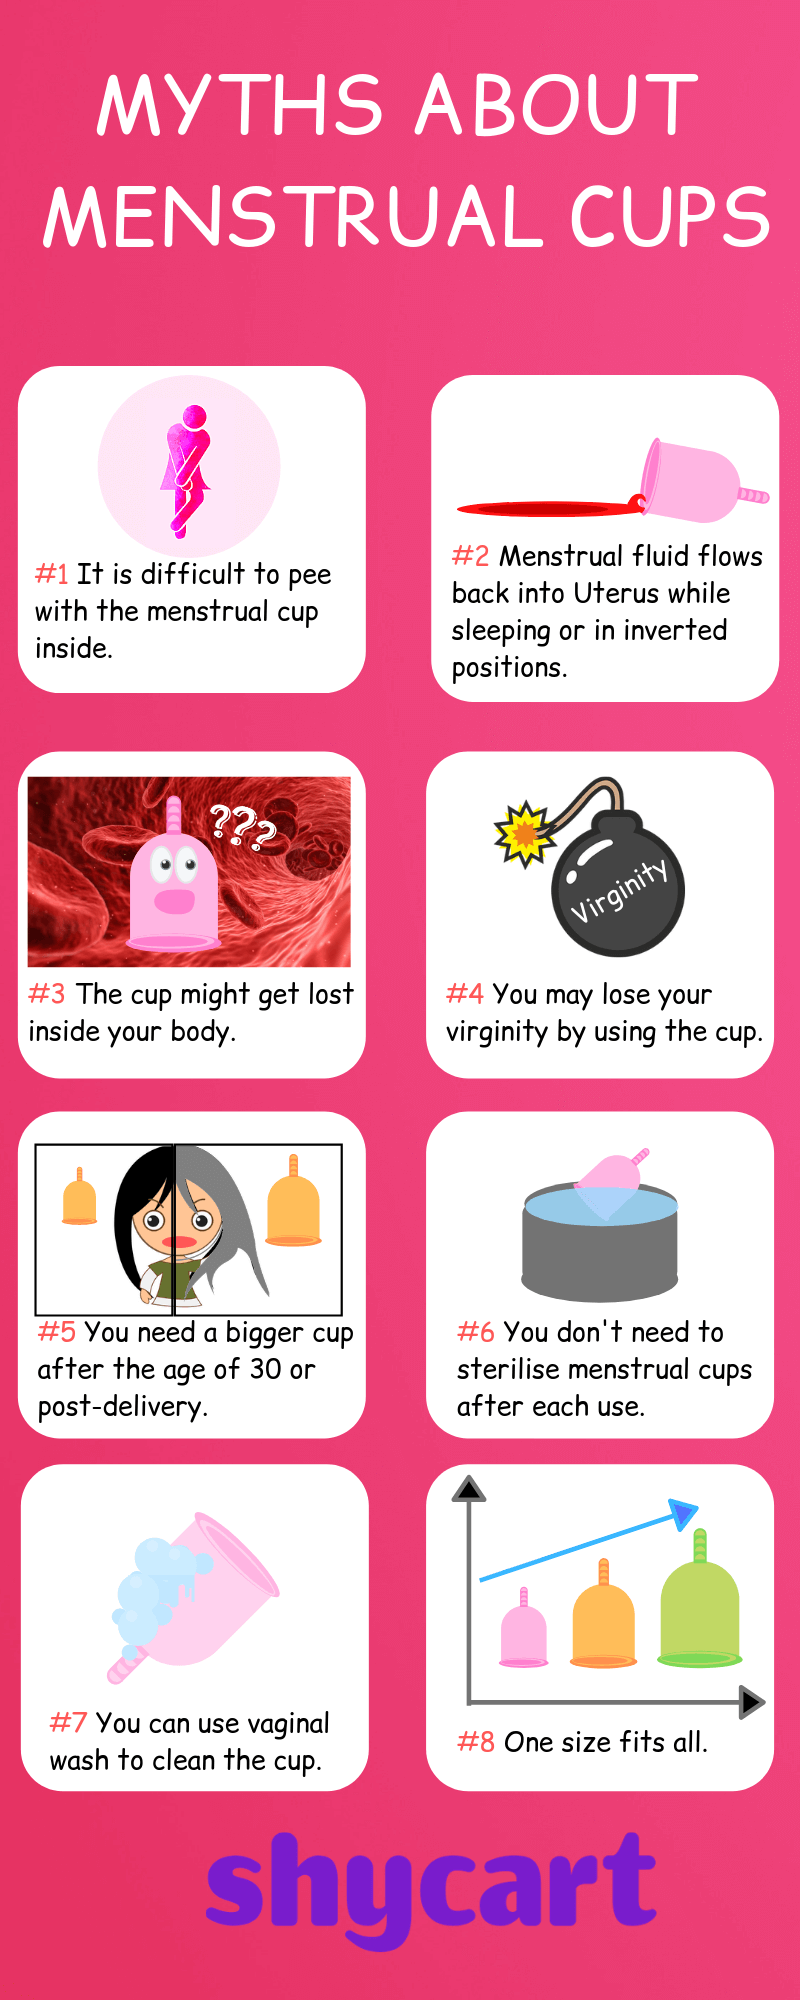 Infographic about myths about menstrual cups